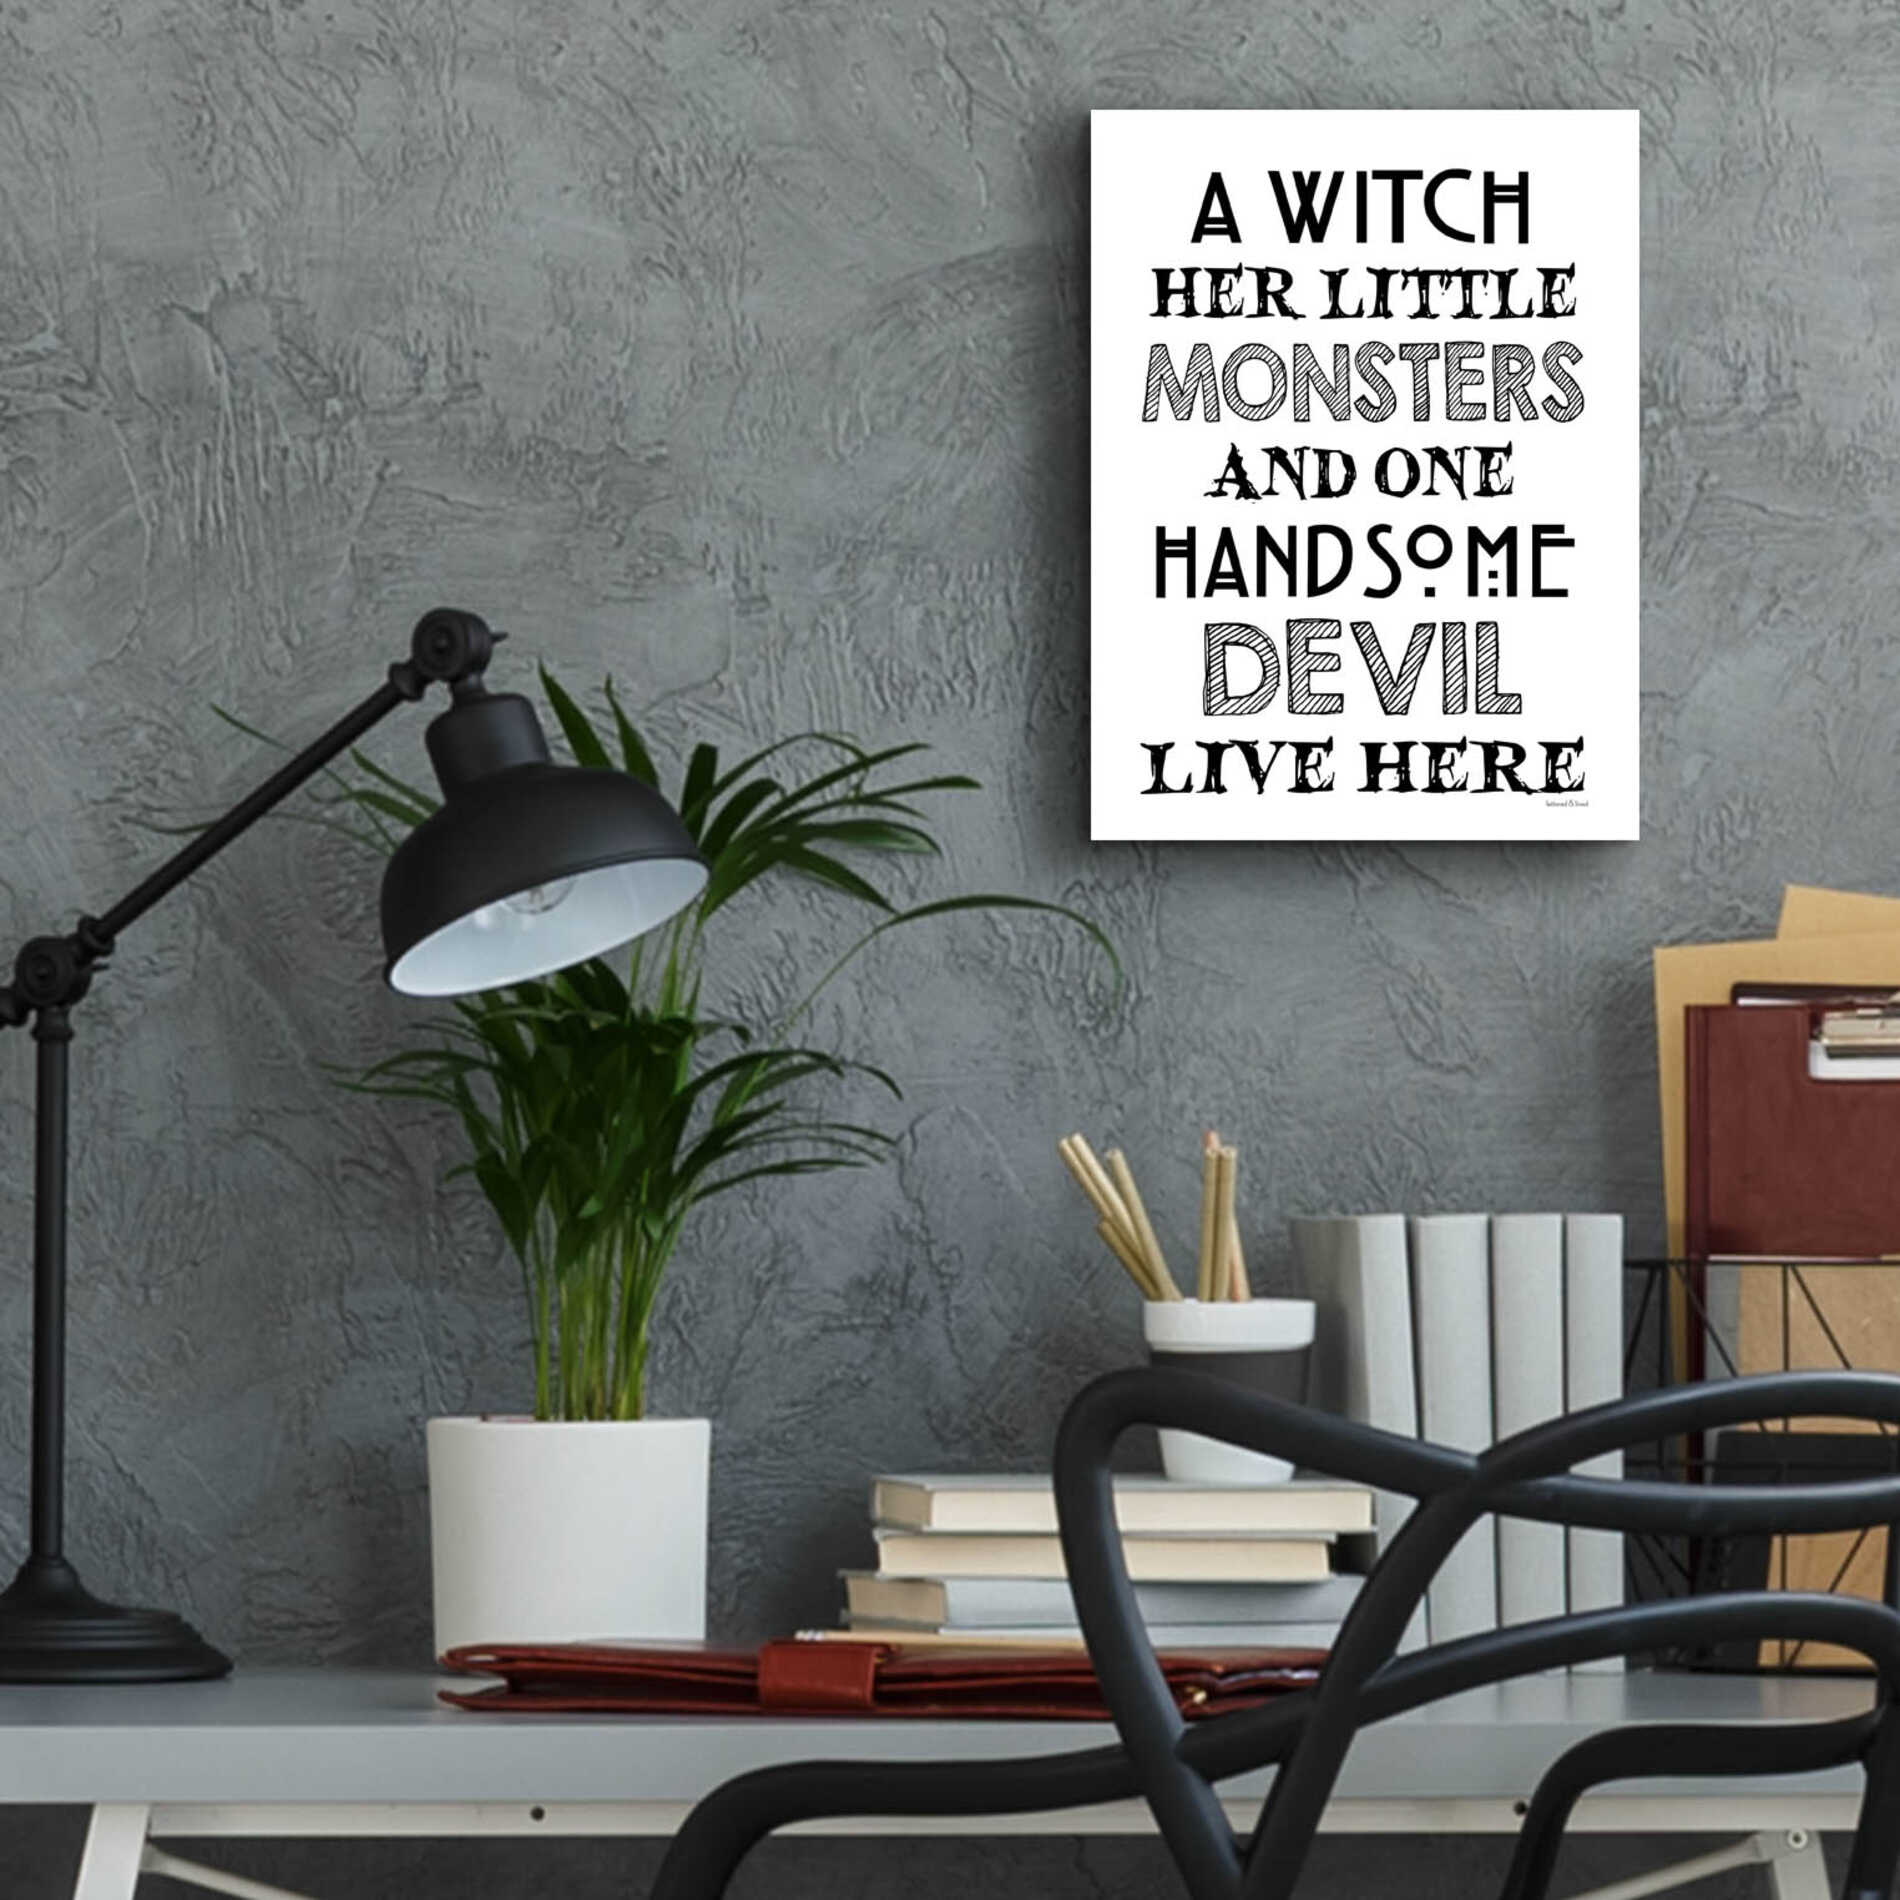 Epic Art 'A Witch' by Lettered & Lined, Acrylic Glass Wall Art,12x16